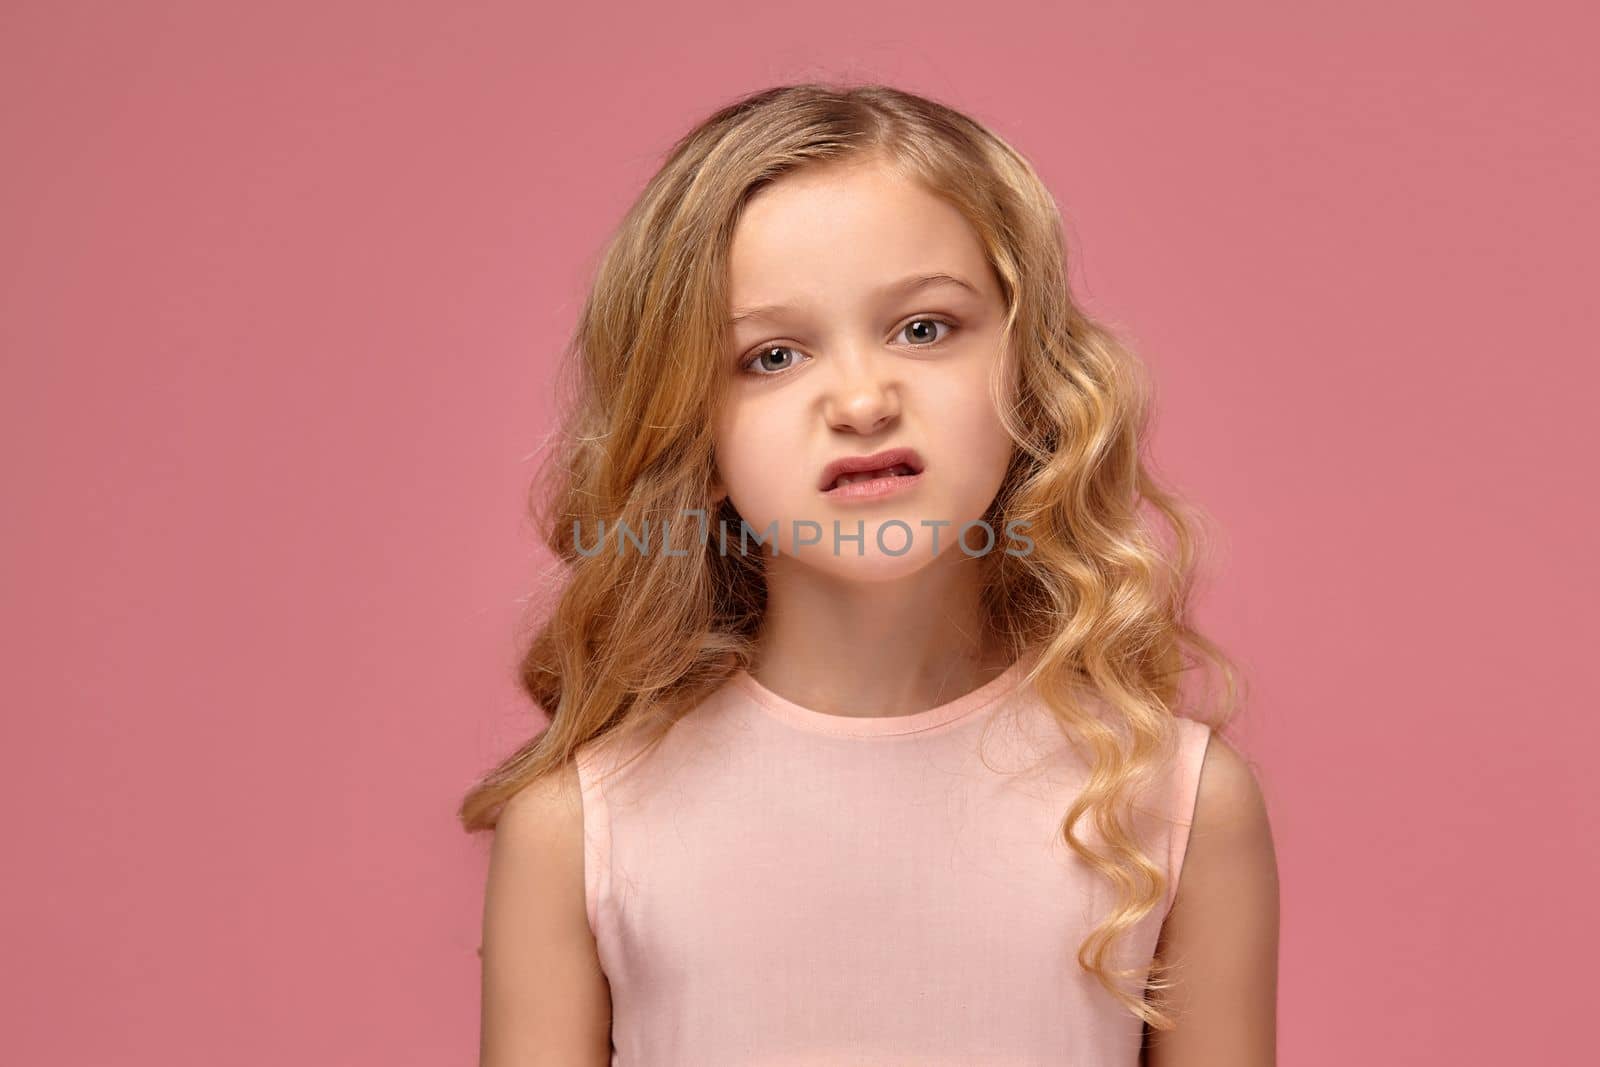 Beautiful little girl with a blond curly hair, in a pink dress poses for the camera and looks angry, on a pink background